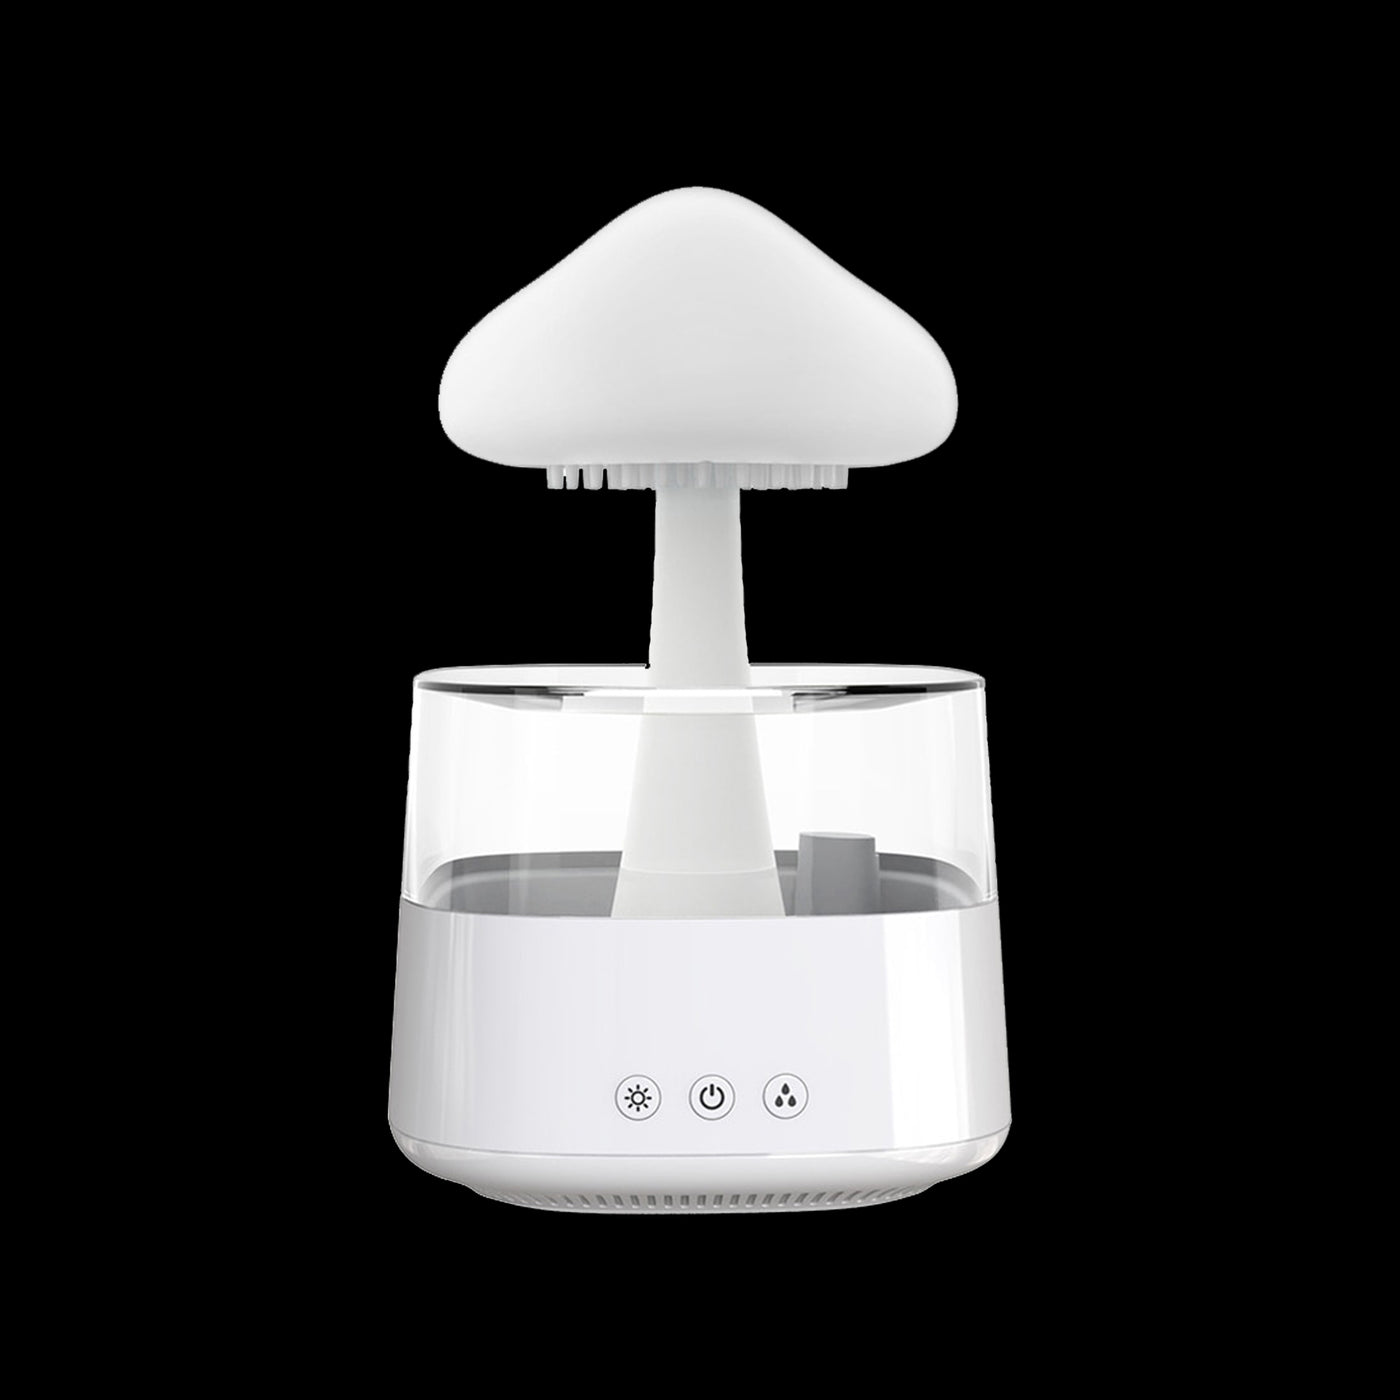 Modern mushroom-shaped air humidifier emitting a fine mist for improved indoor air quality and comfort.